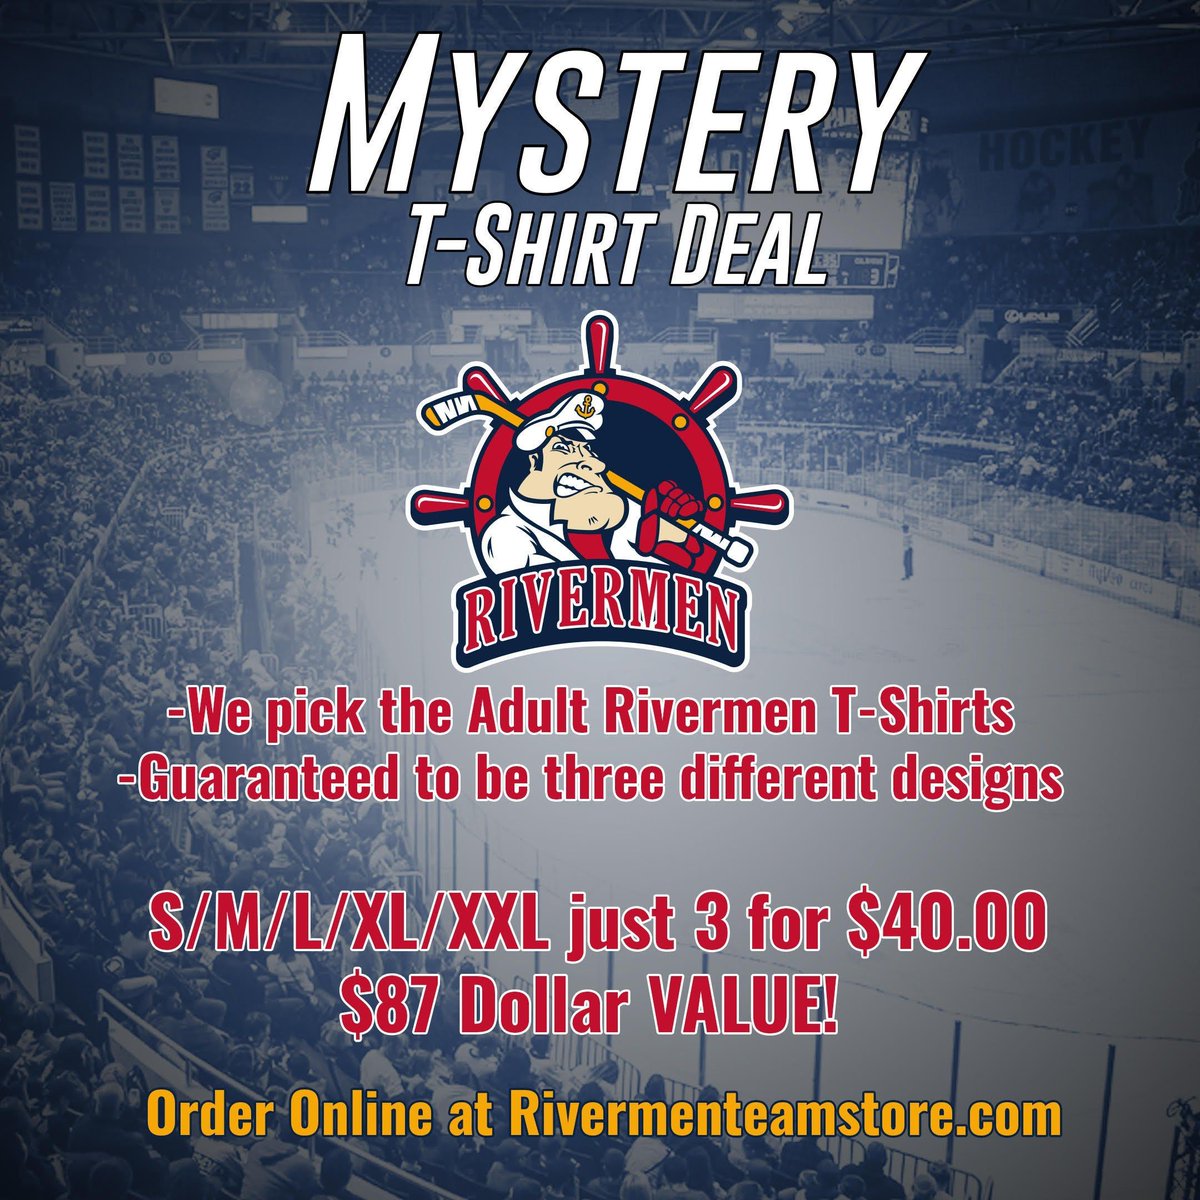 Back by Popular Demand! Our 3 for $40 Adult Mystery T-Shirt Package. 3 different adult Rivermen T-Shirts for just $40.00. We pick the designs. Very Limited sizing availability... Small - XXL. Grab yours before they are all gone for the summer! buff.ly/4bBi5fX